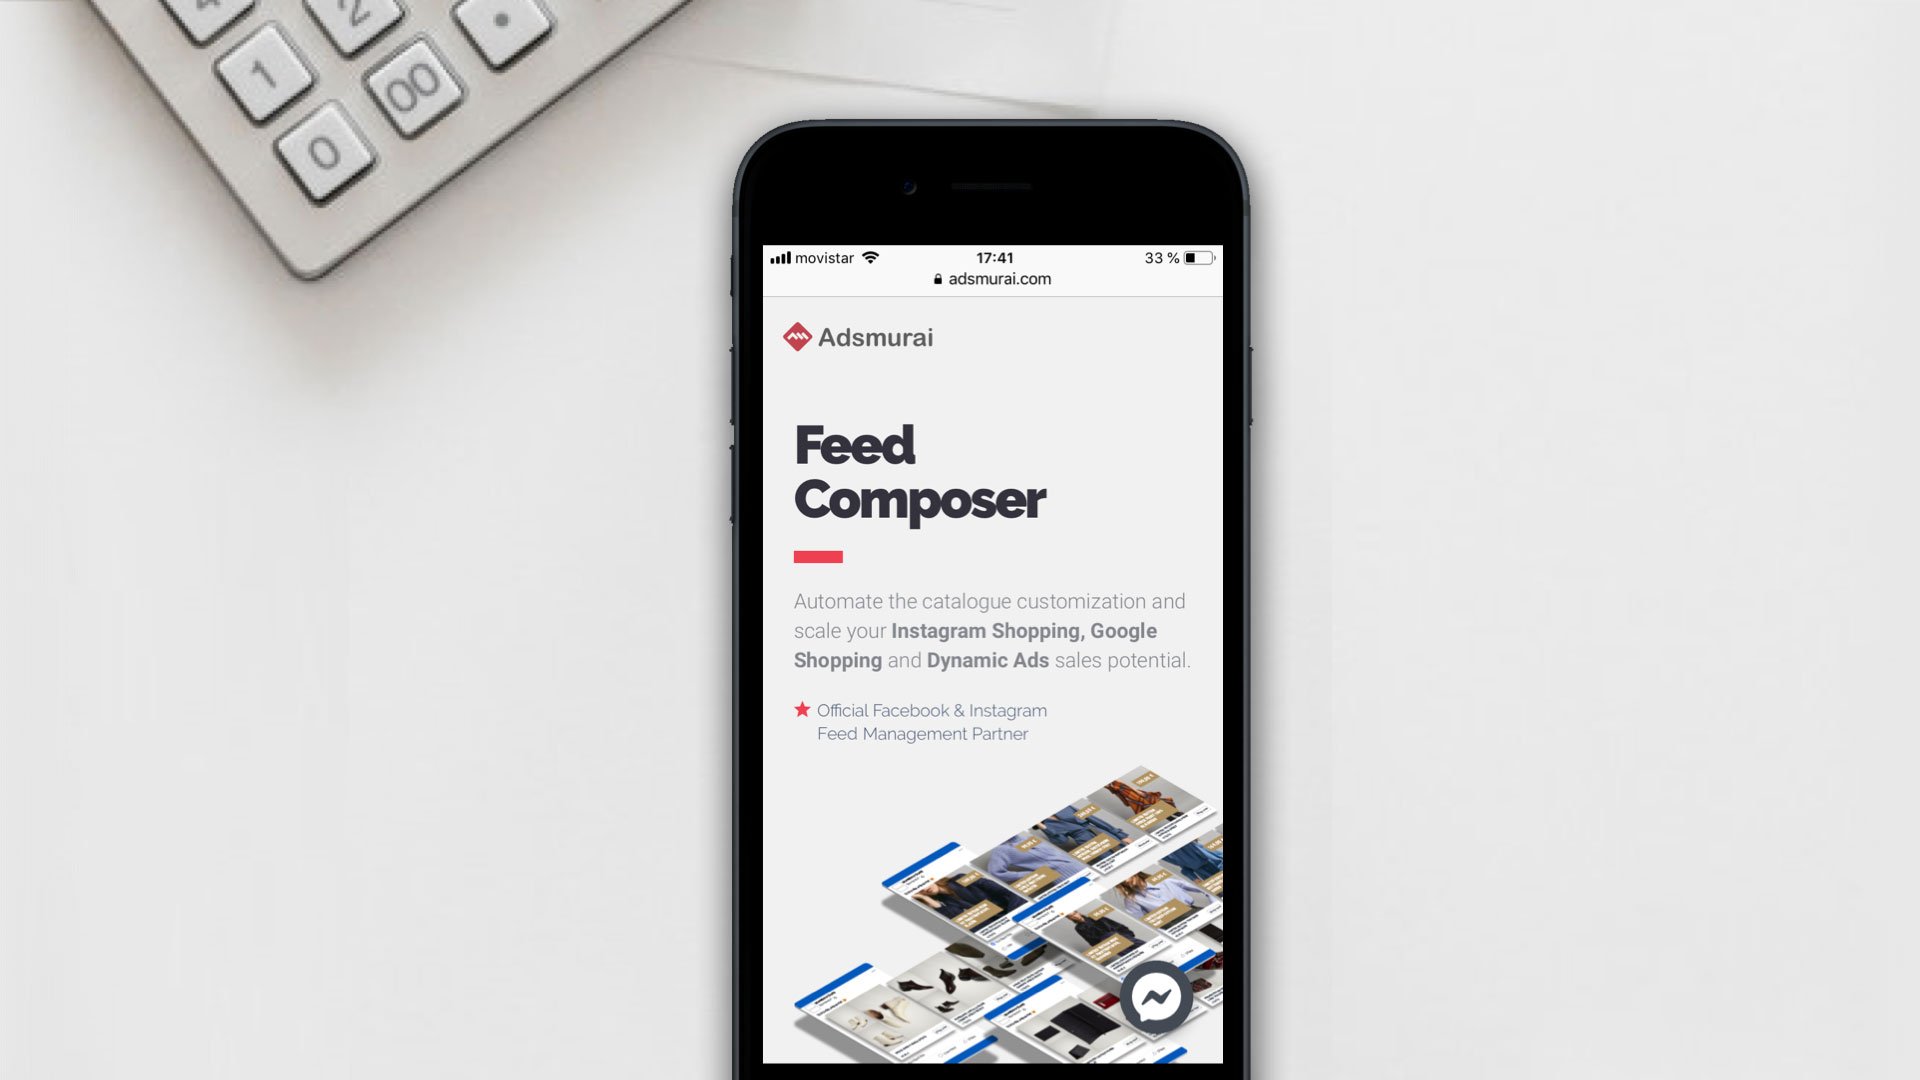 Feed Composer